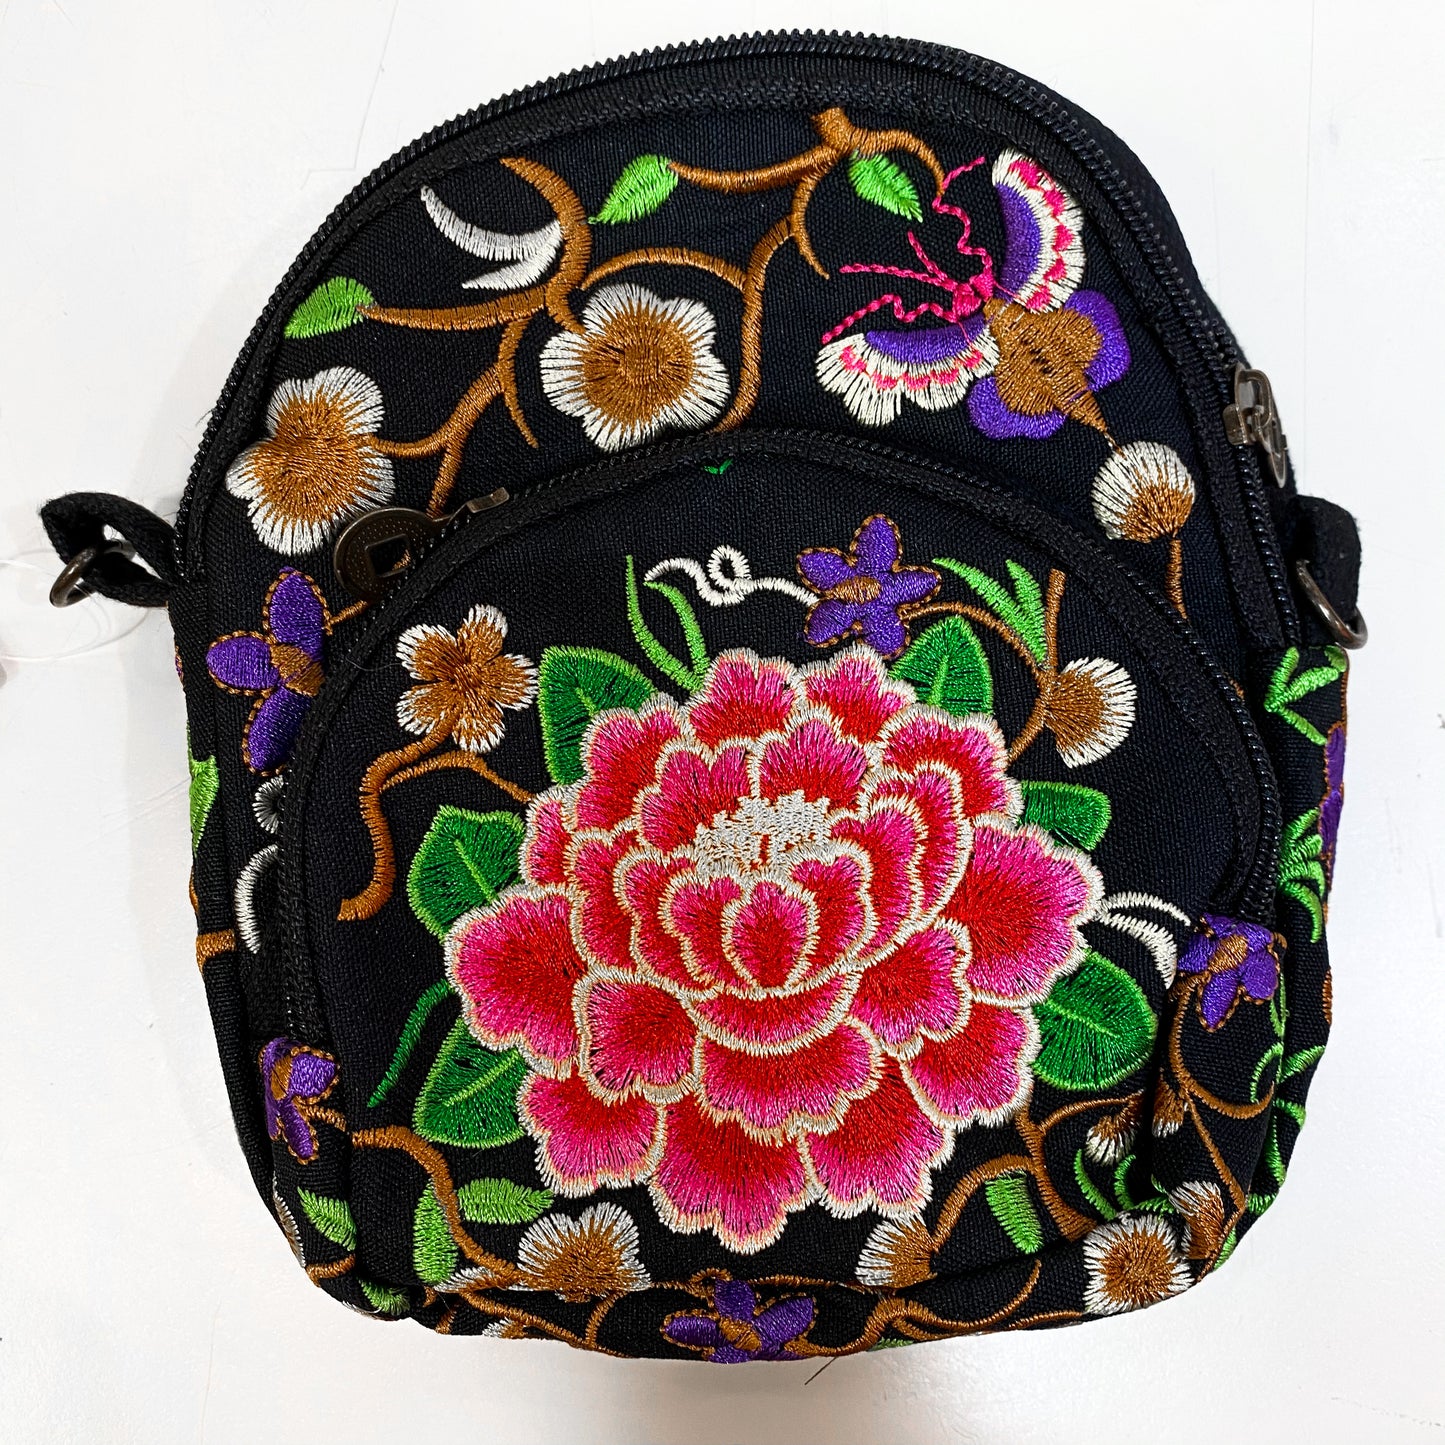 Embroidered Floral Cross Bag